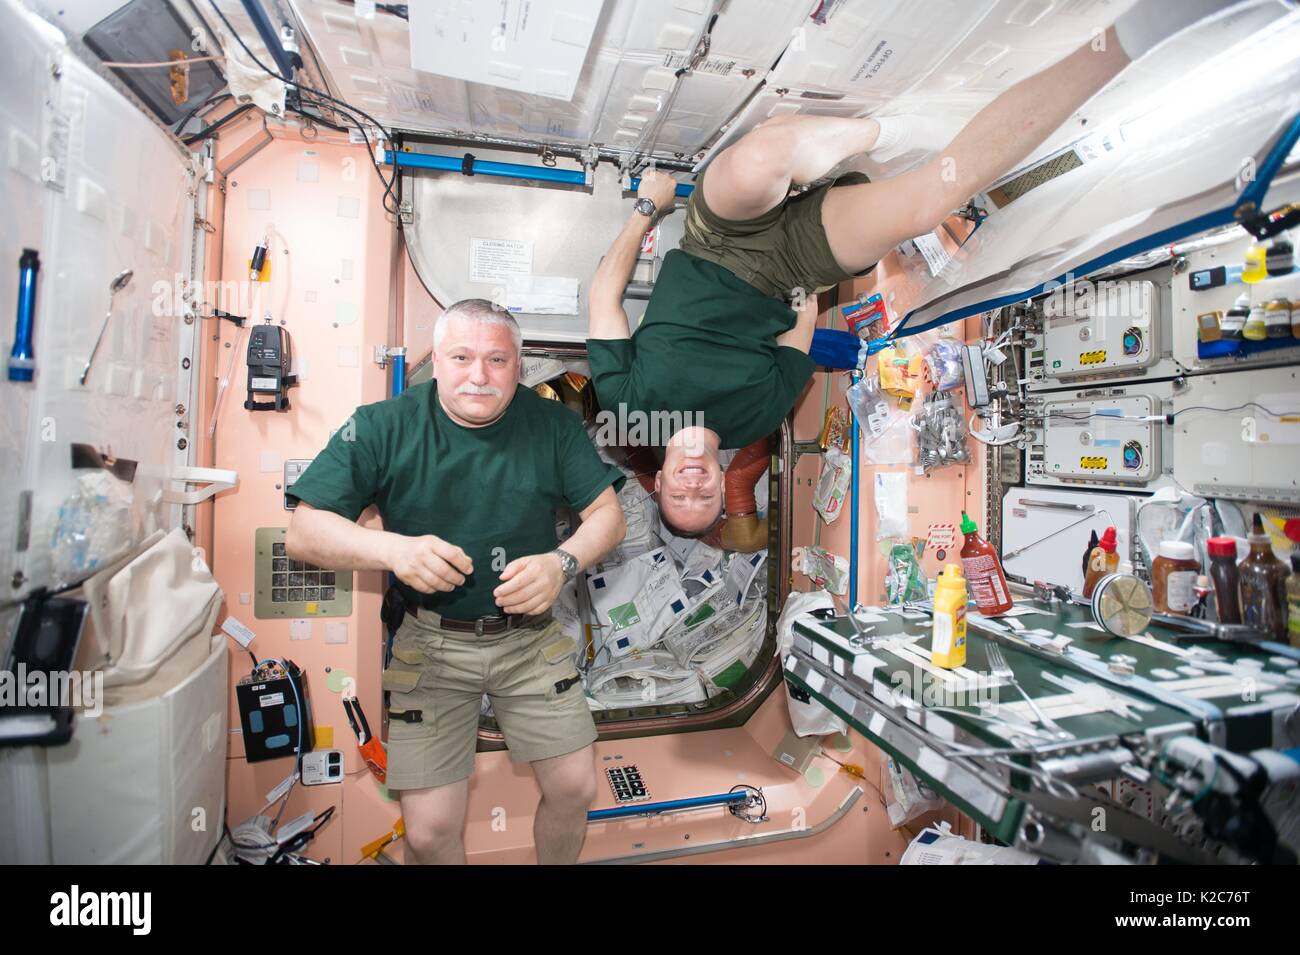 NASA International Space Station Expedition 51 prime crew members Russian cosmonaut Fyodor Yurchikhin of Roscosmos (left) and American astronaut Jack Fischer take a break in the Unity Module April 29, 2017 in Earth orbit. Stock Photo